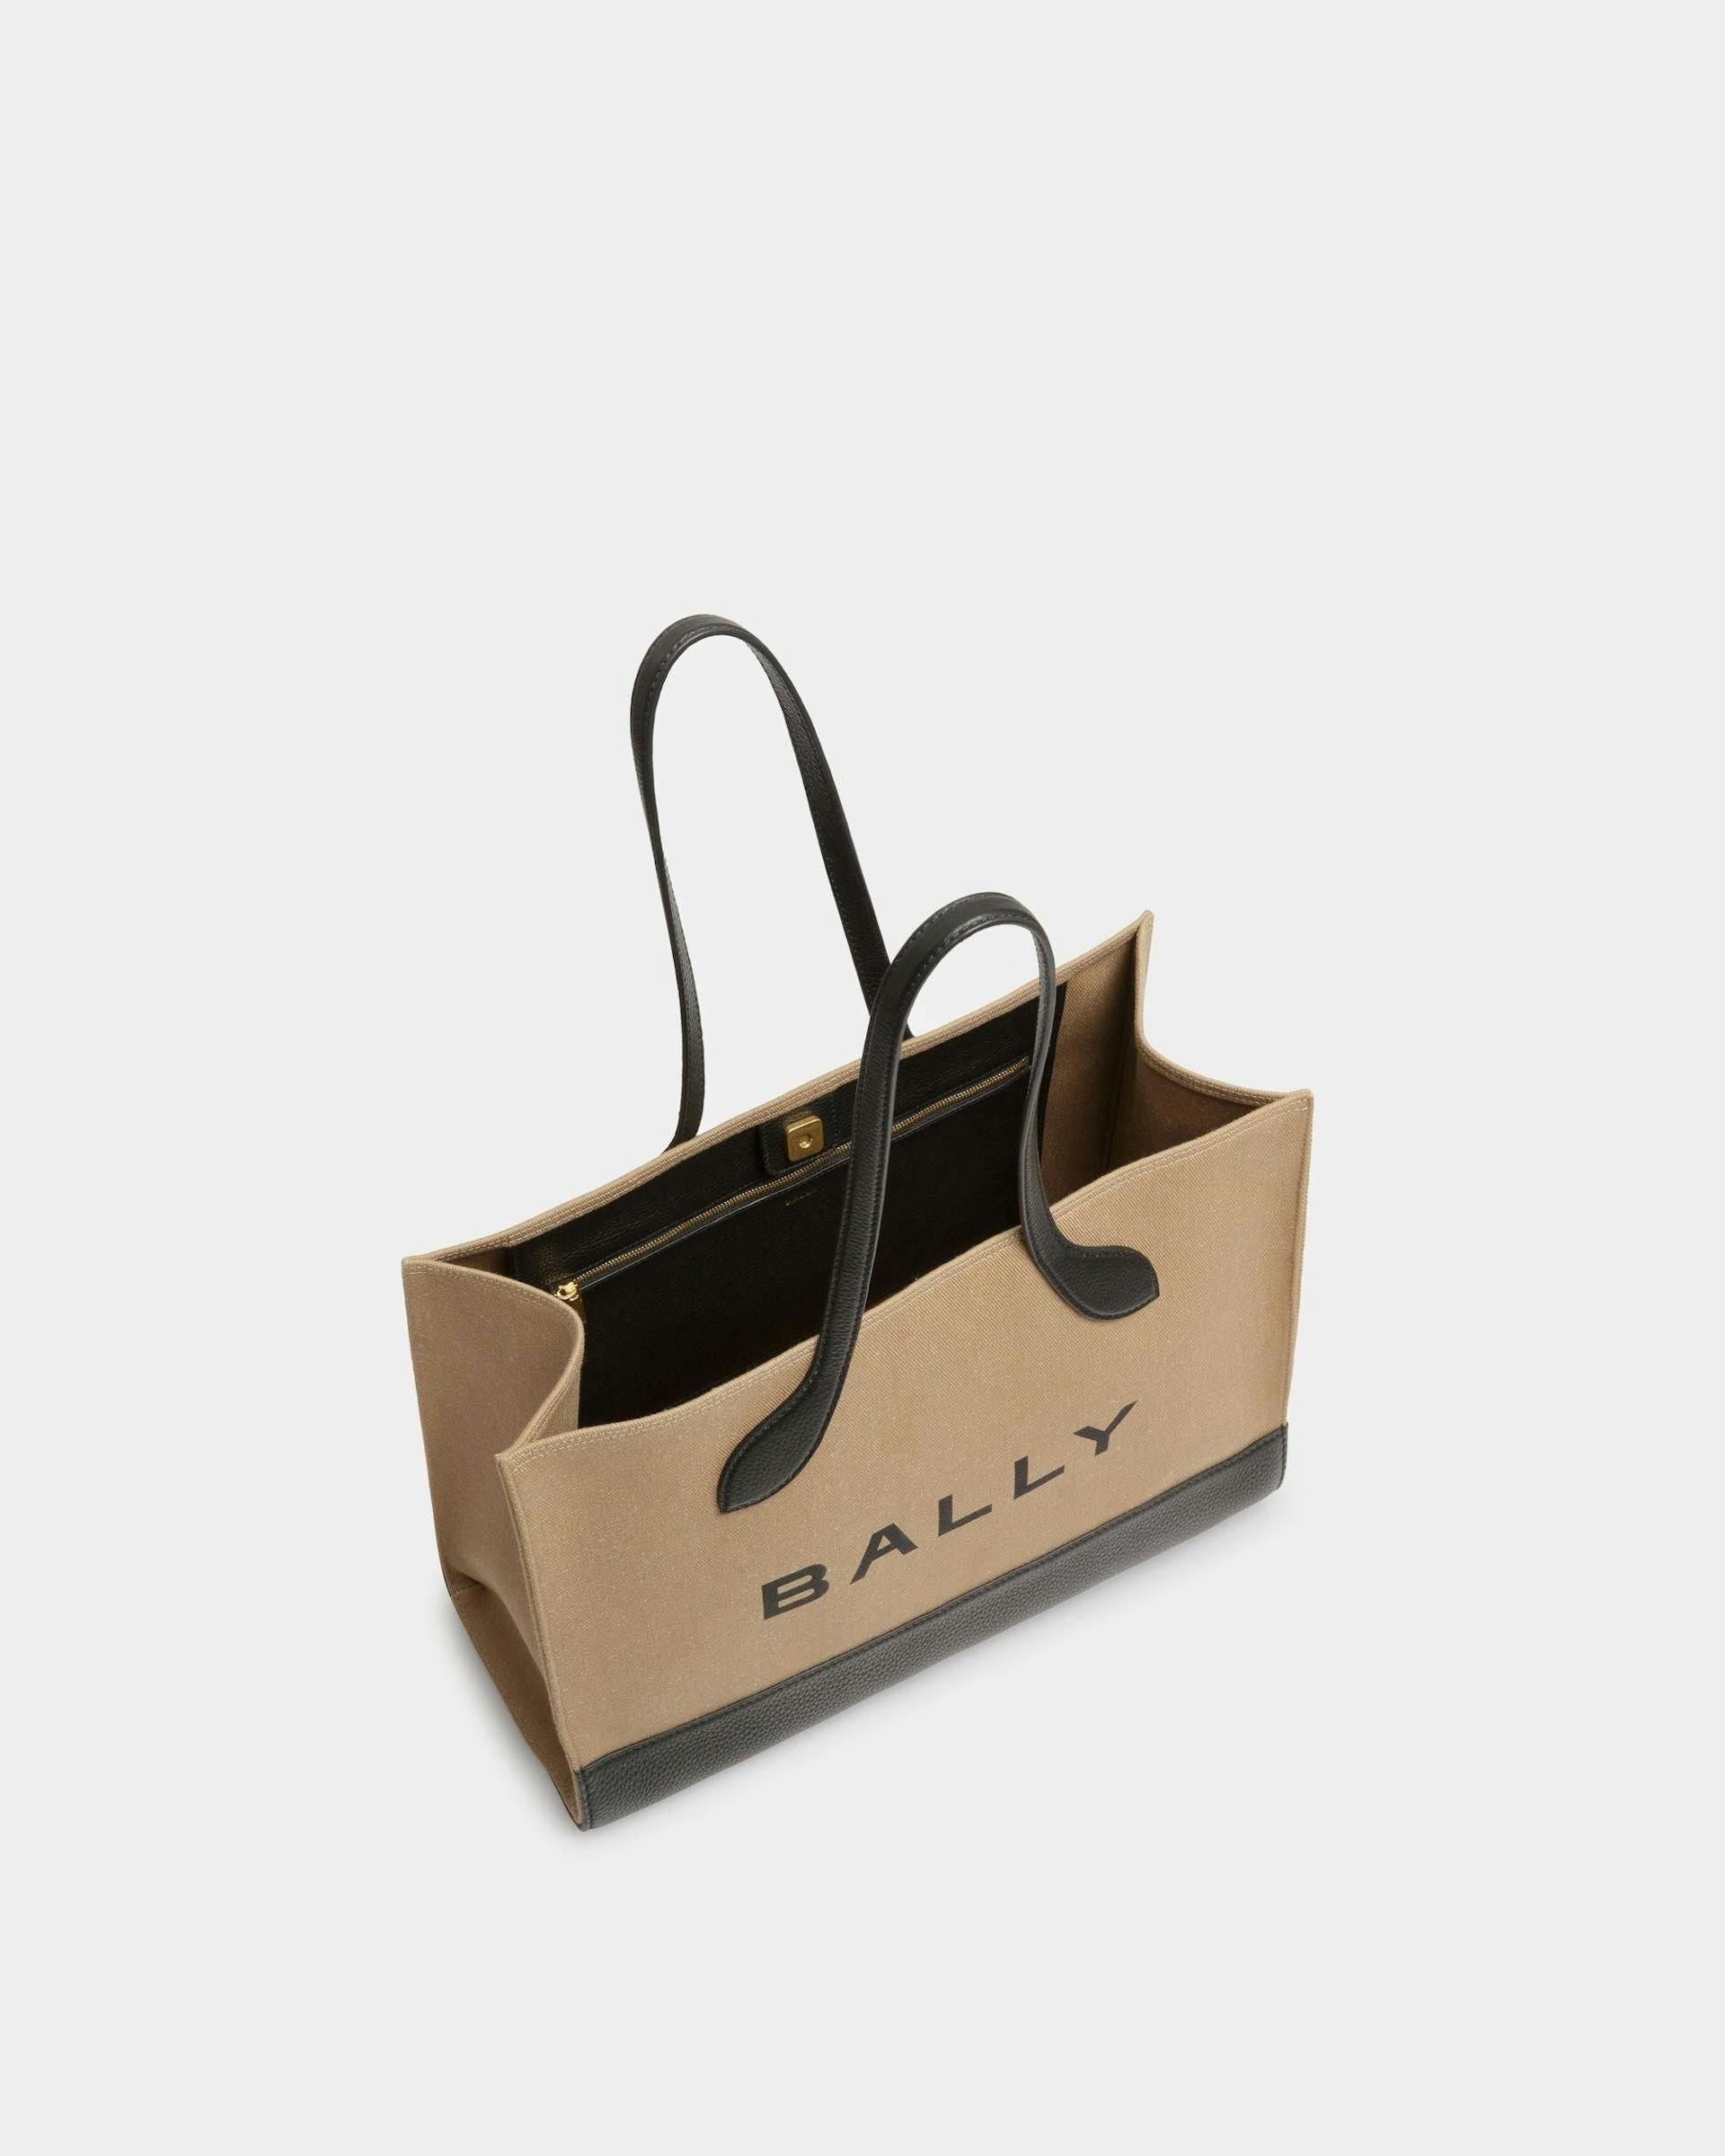 Women's Bar Tote Bag In Sand And Black Fabric | Bally | Still Life Open / Inside